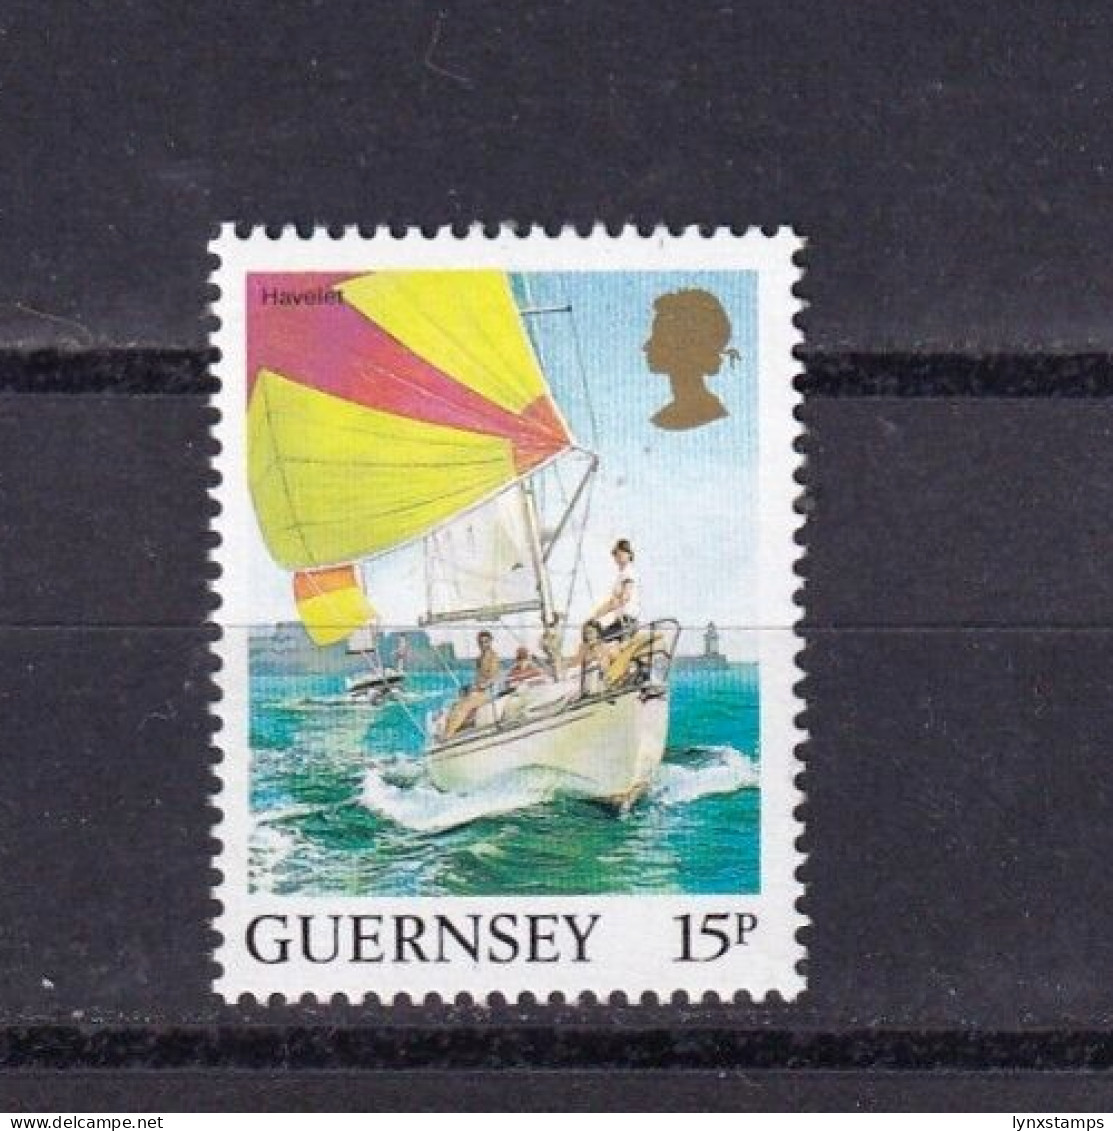 LI01 Guernsey Great Britain 1985 Daily Stamps - Local Issues